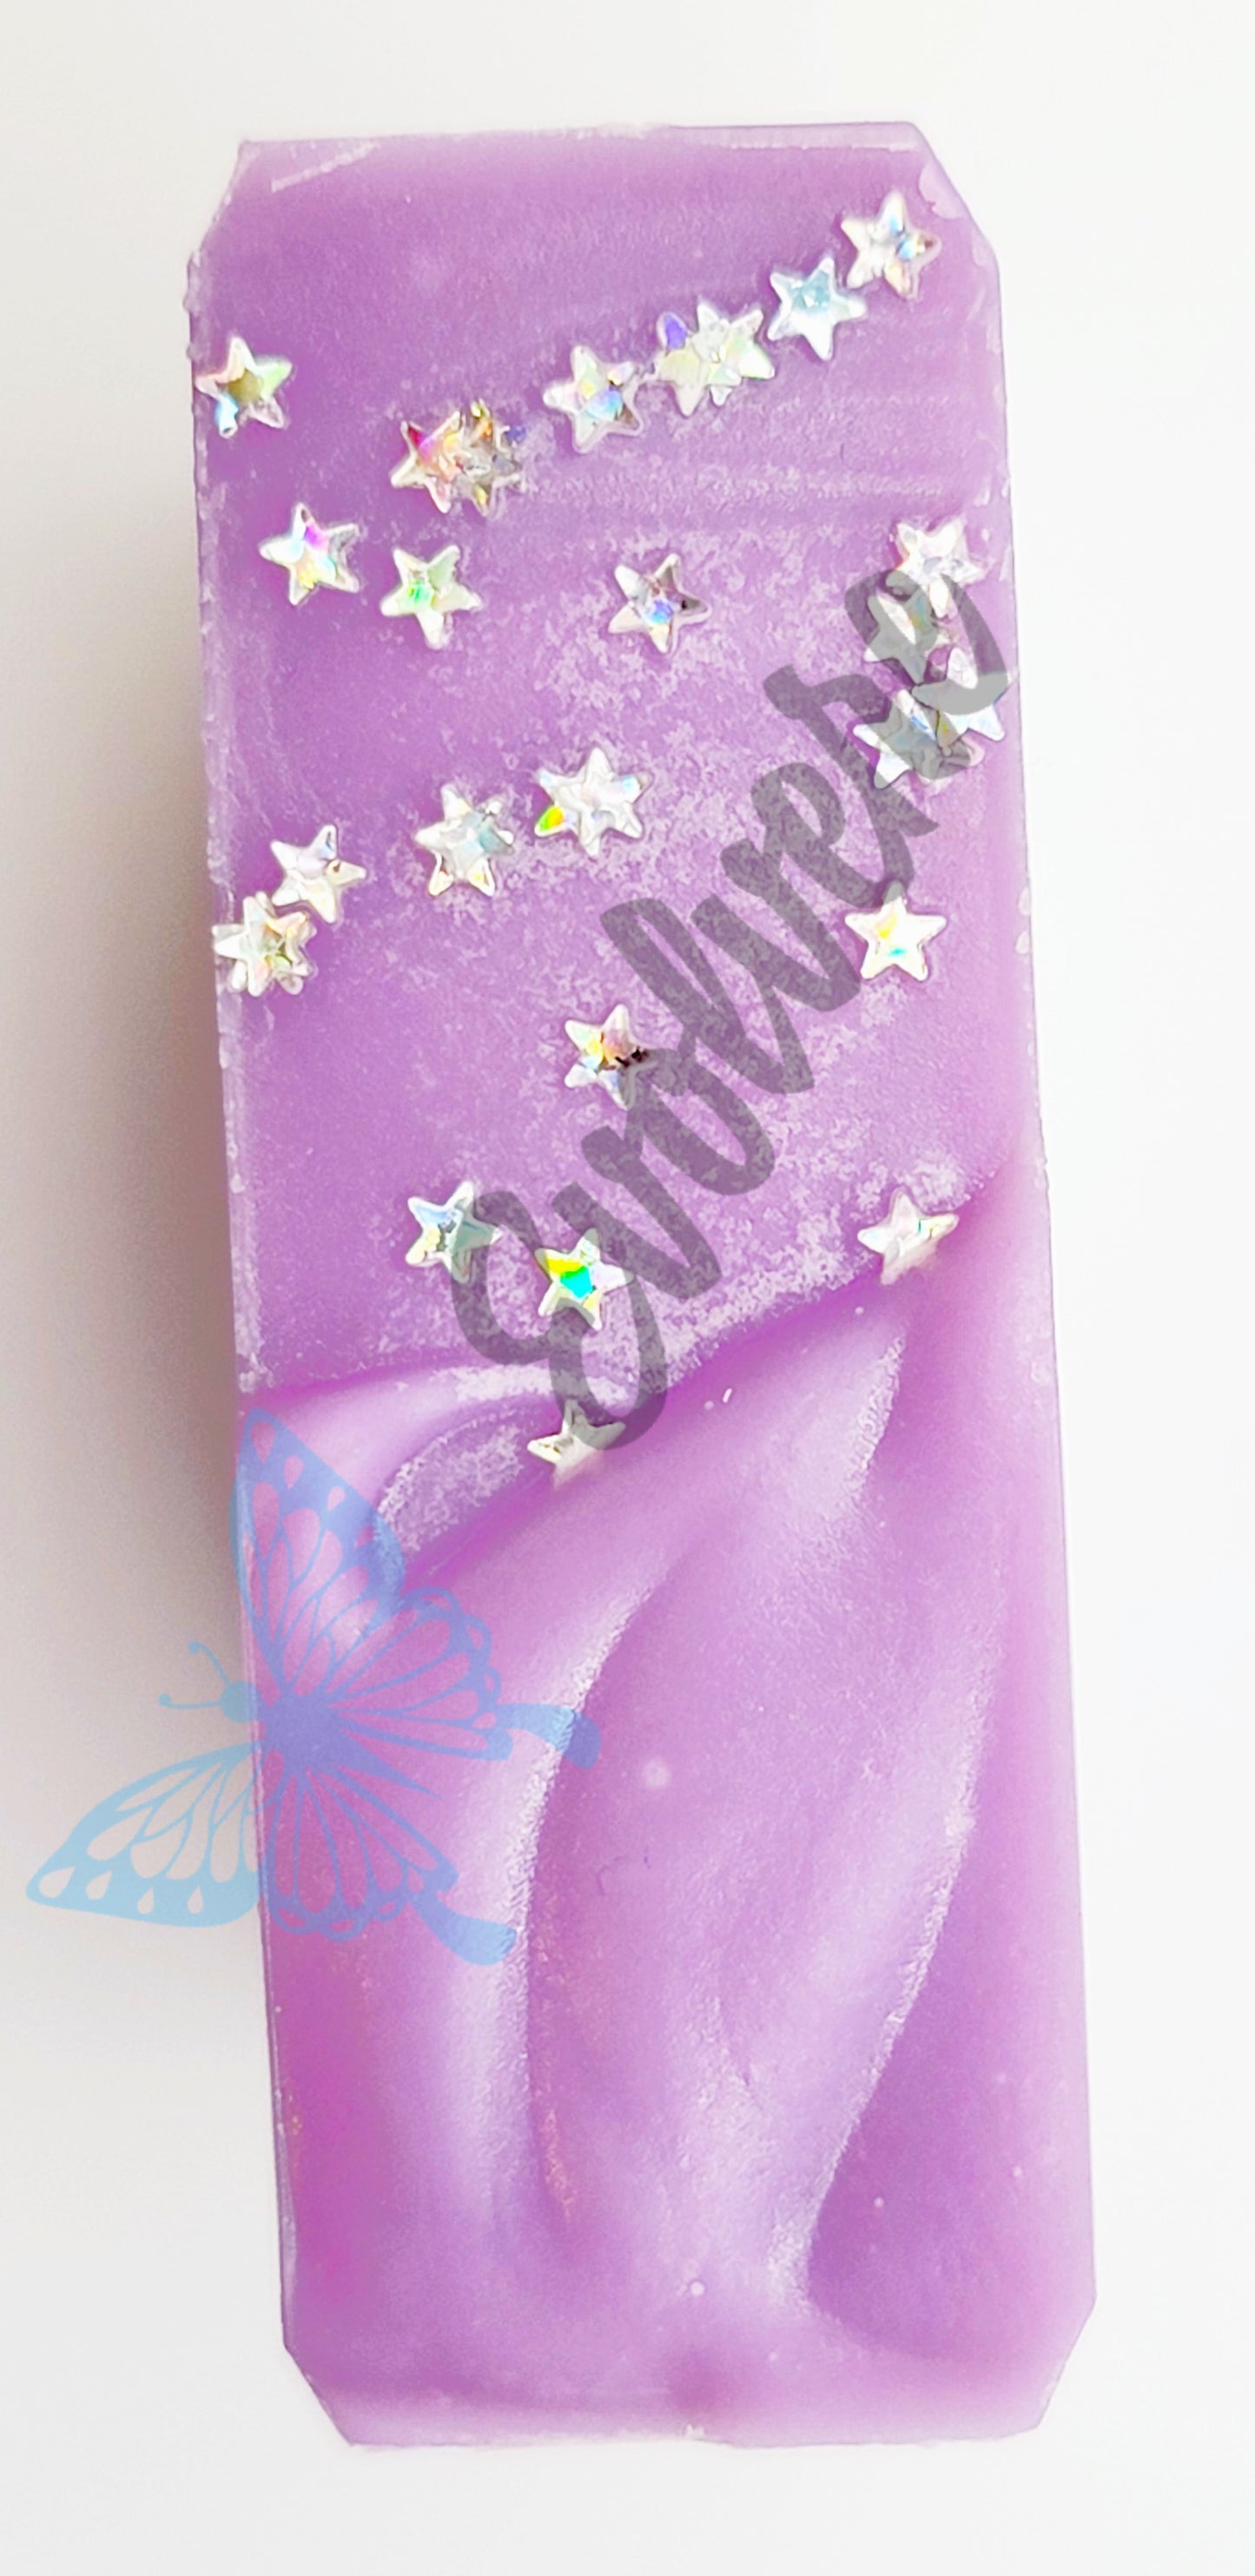 Textured purple top with silver stars in biodegradable glitter